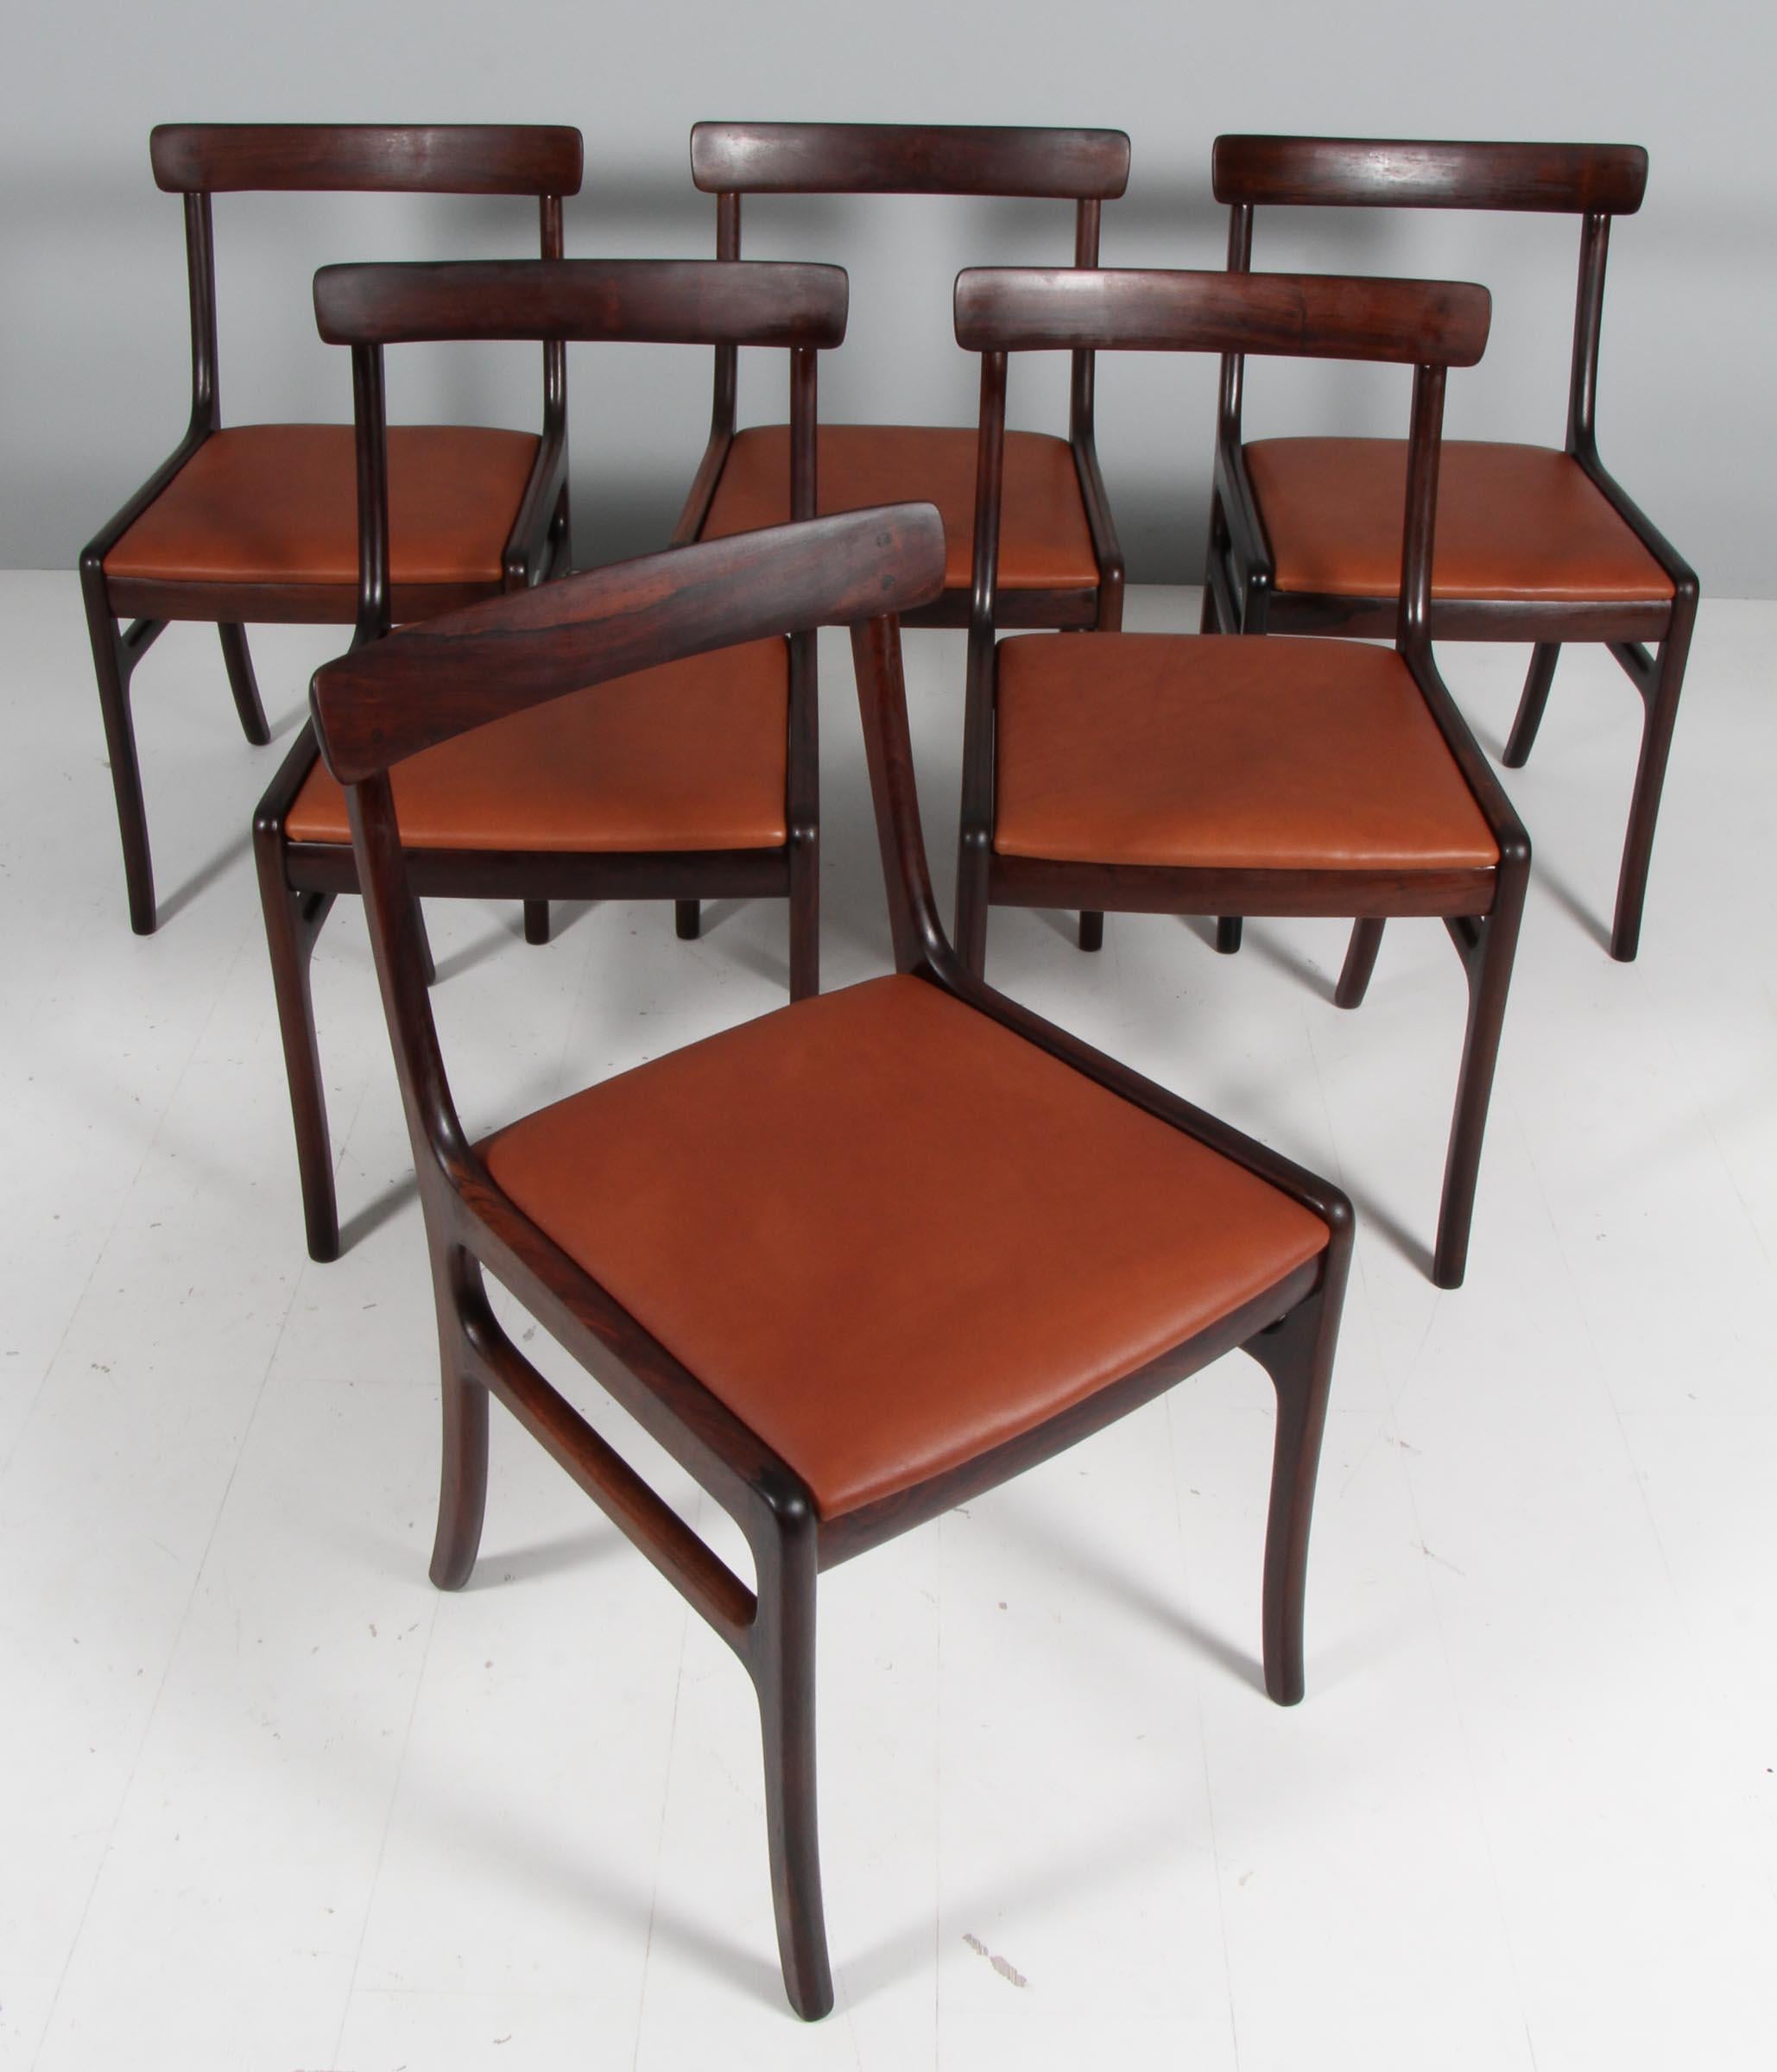 Ole Wanscher set of six Rungstedlun dining chairs in rosewood.

New upholstered with brandy aniline leather.

Model Rungstedlund, made by Poul Jeppesen.

